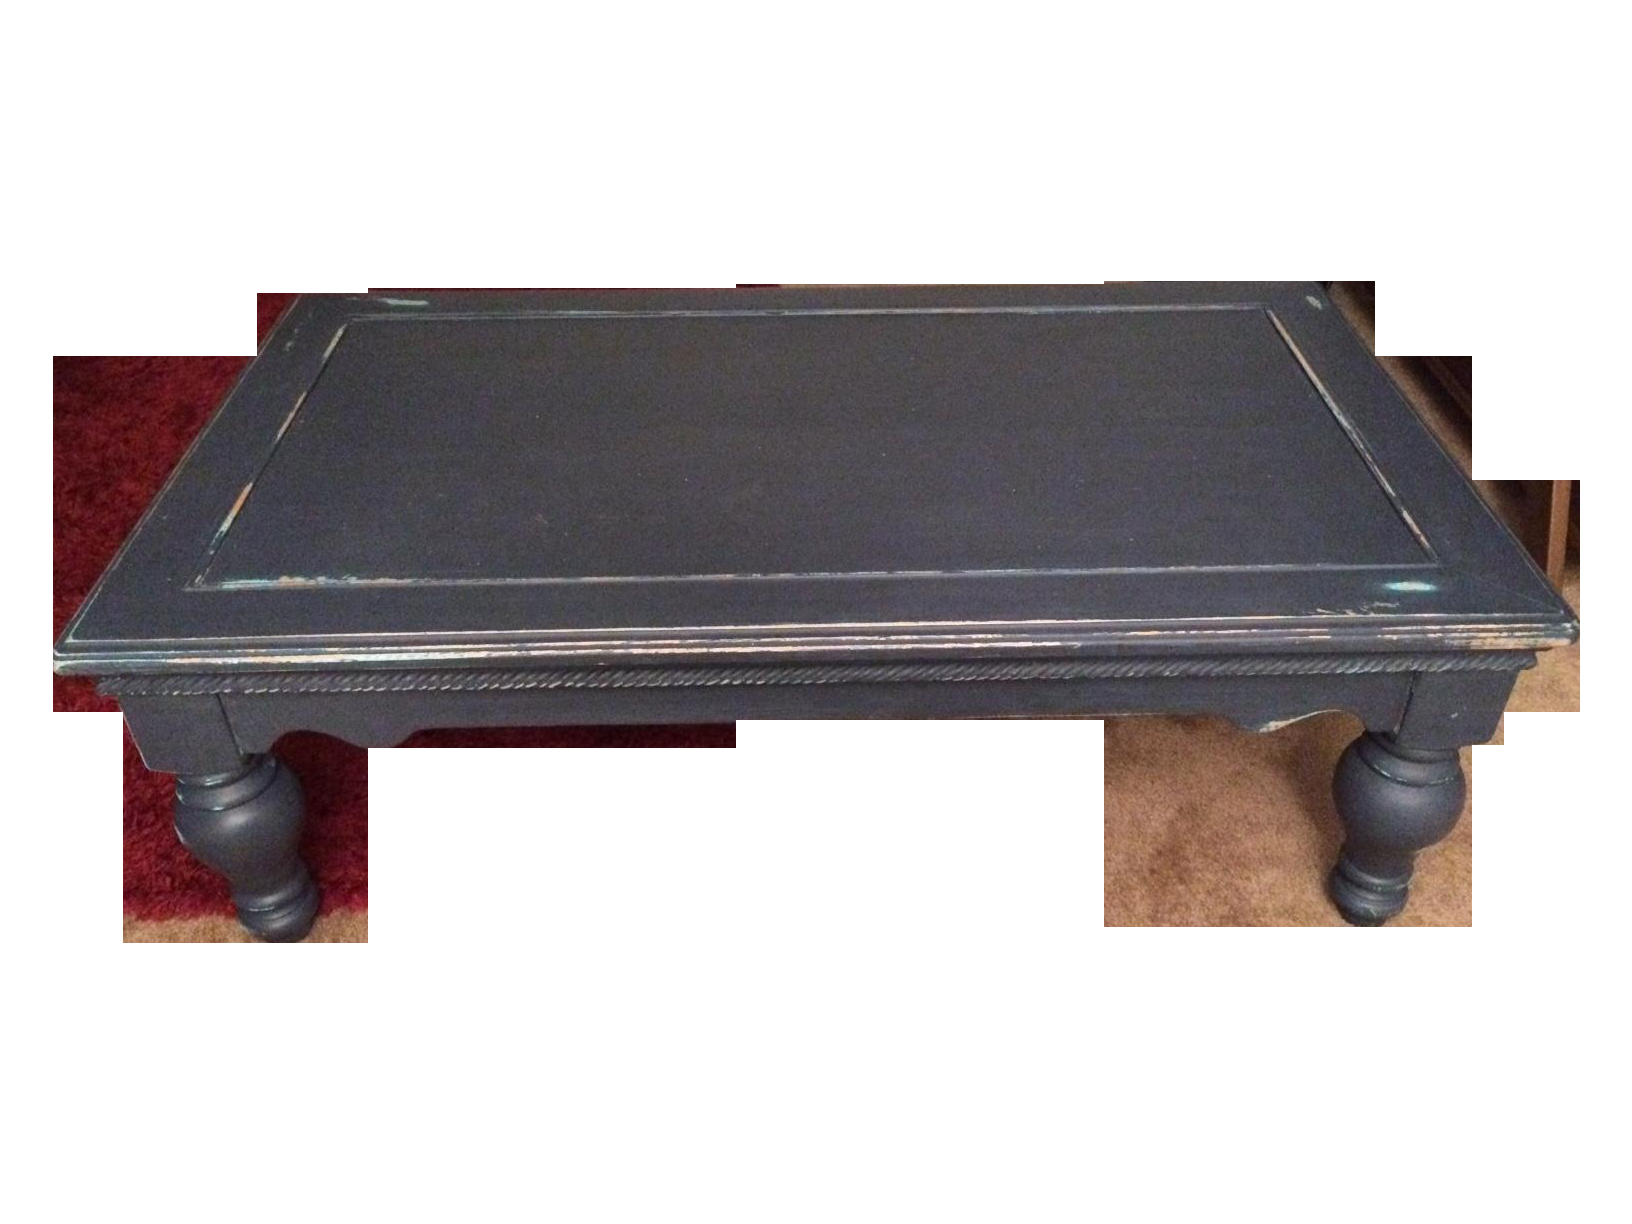 Distressed Blue Shab Chic Coffee Table Chairish Shab Chic within size 1632 X 1224